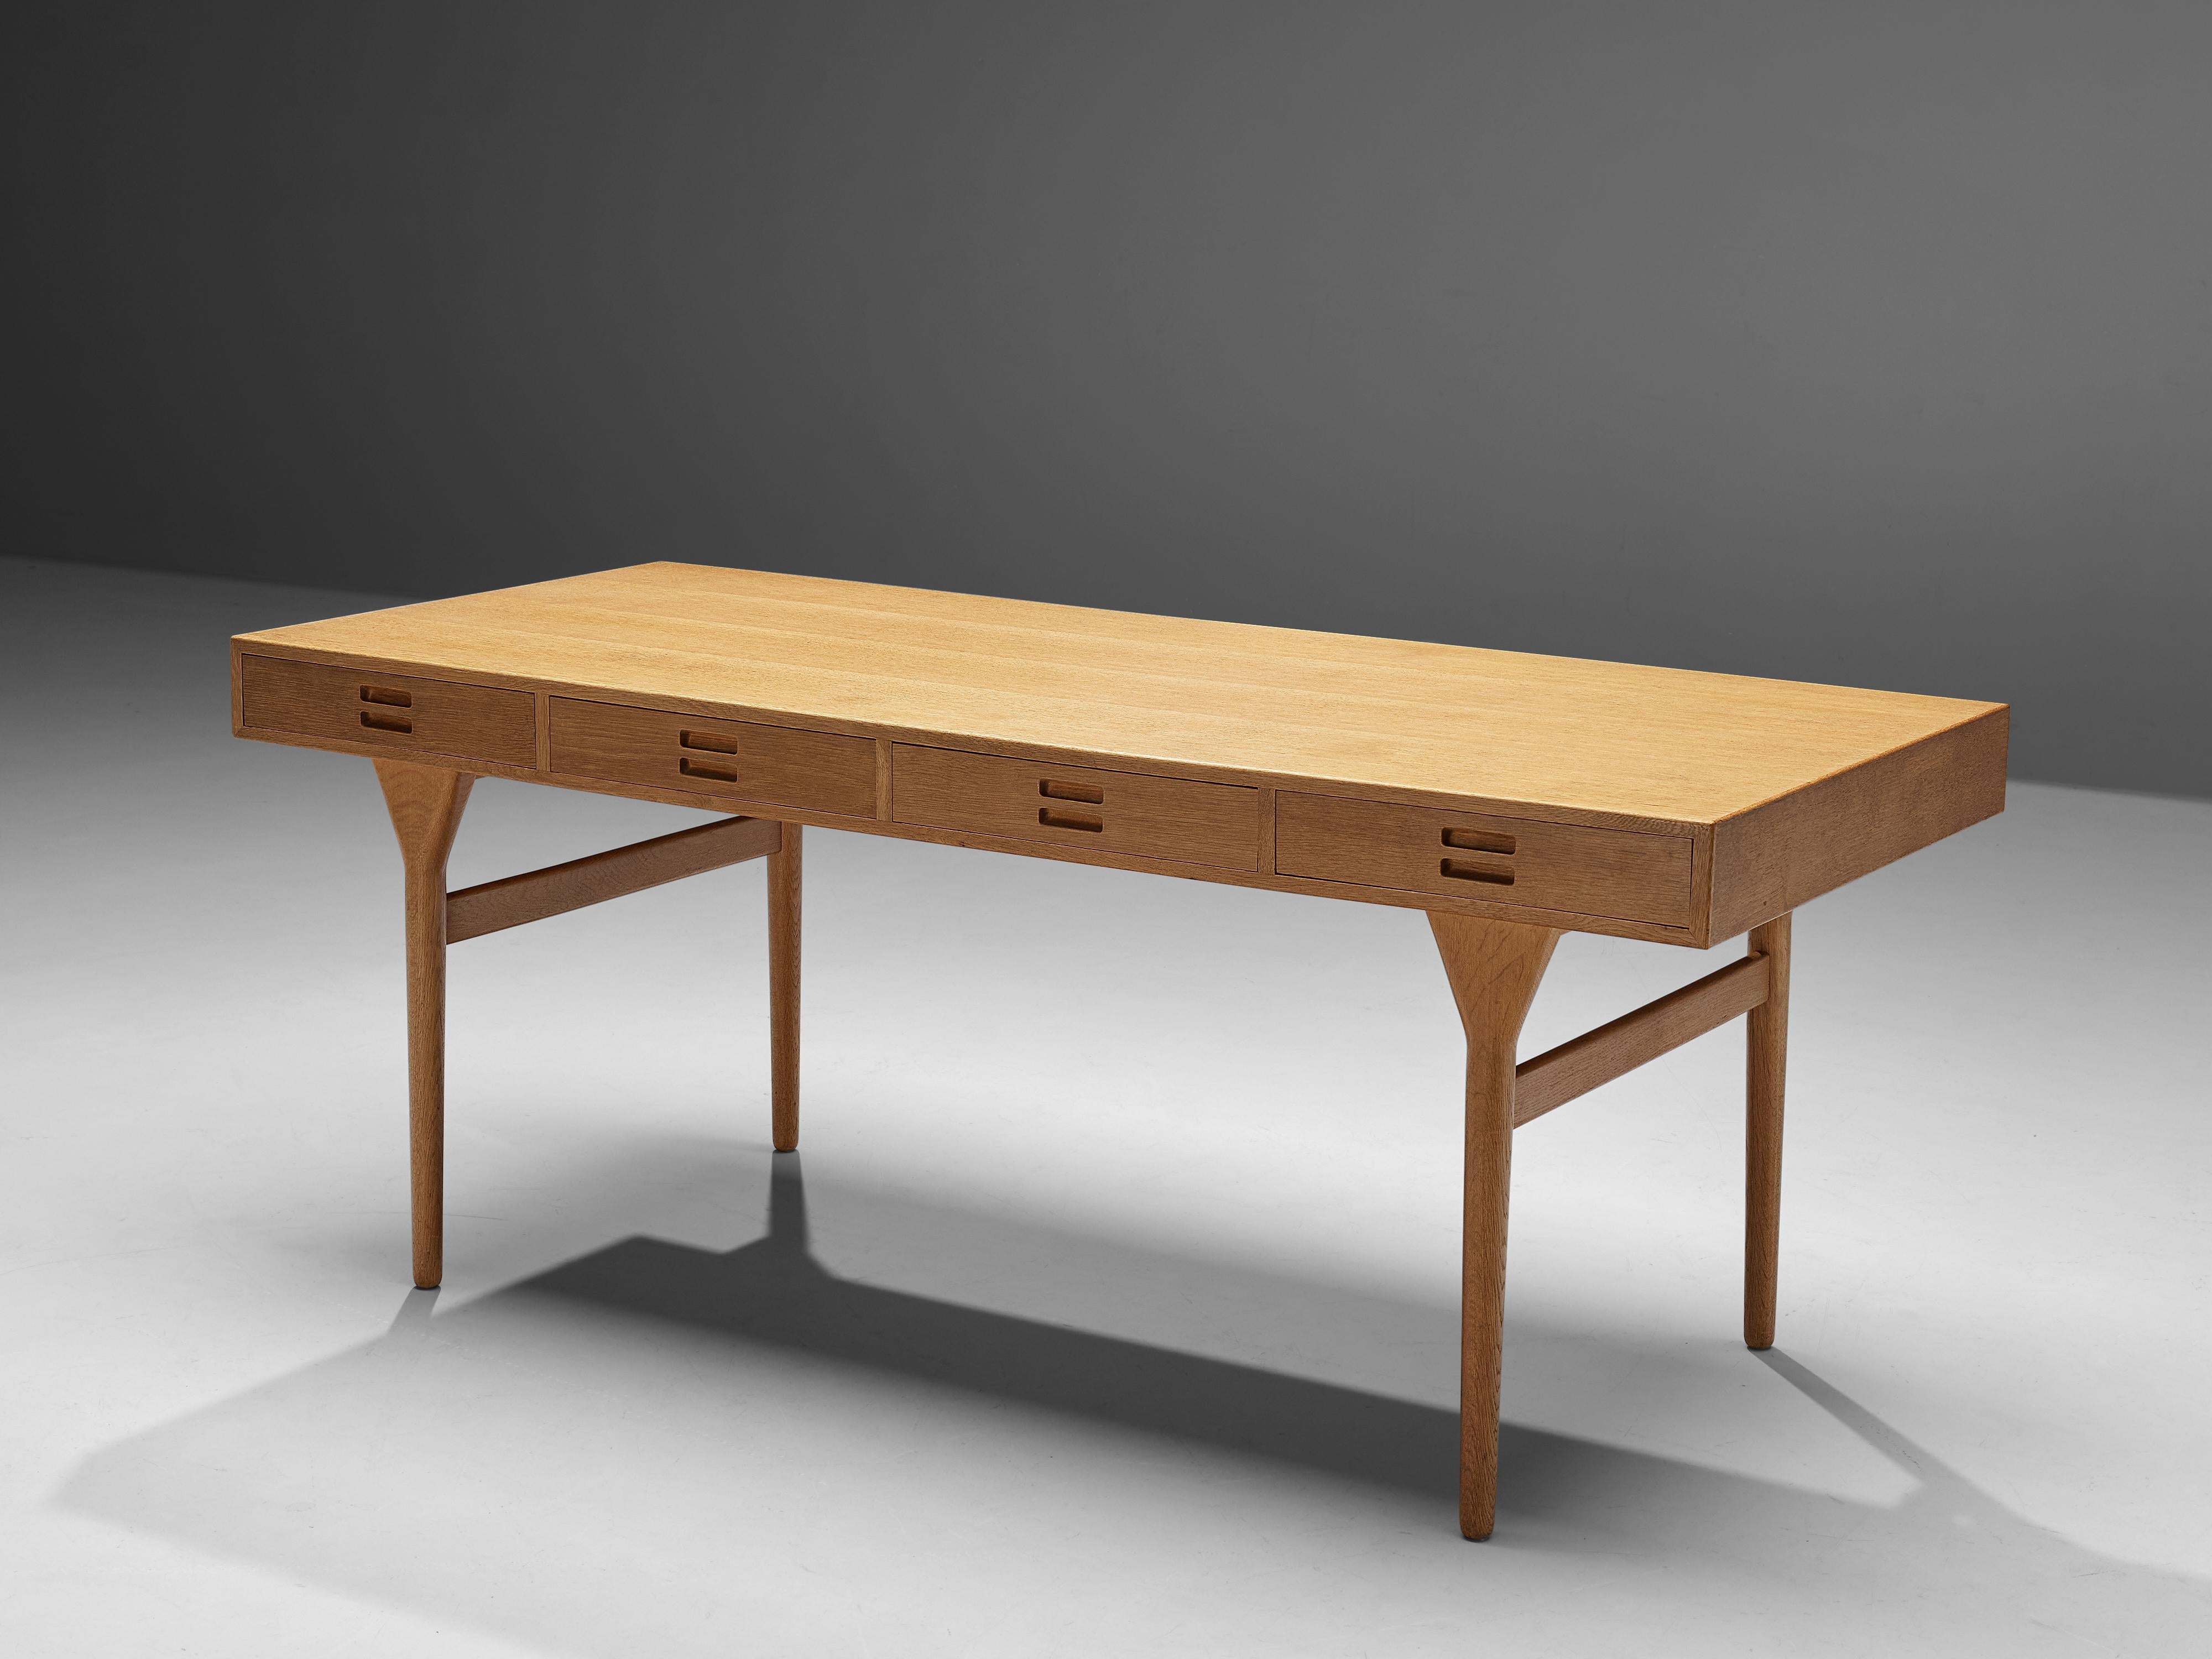 Nanna Ditzel, desk, oak, Denmark, 1950s

Danish designer Nanna Ditzel created this beautiful desk in the 1950s. Four tapered legs lift the table top with integrated drawers up. Decorative and functional detail at the same time are the handles. Two